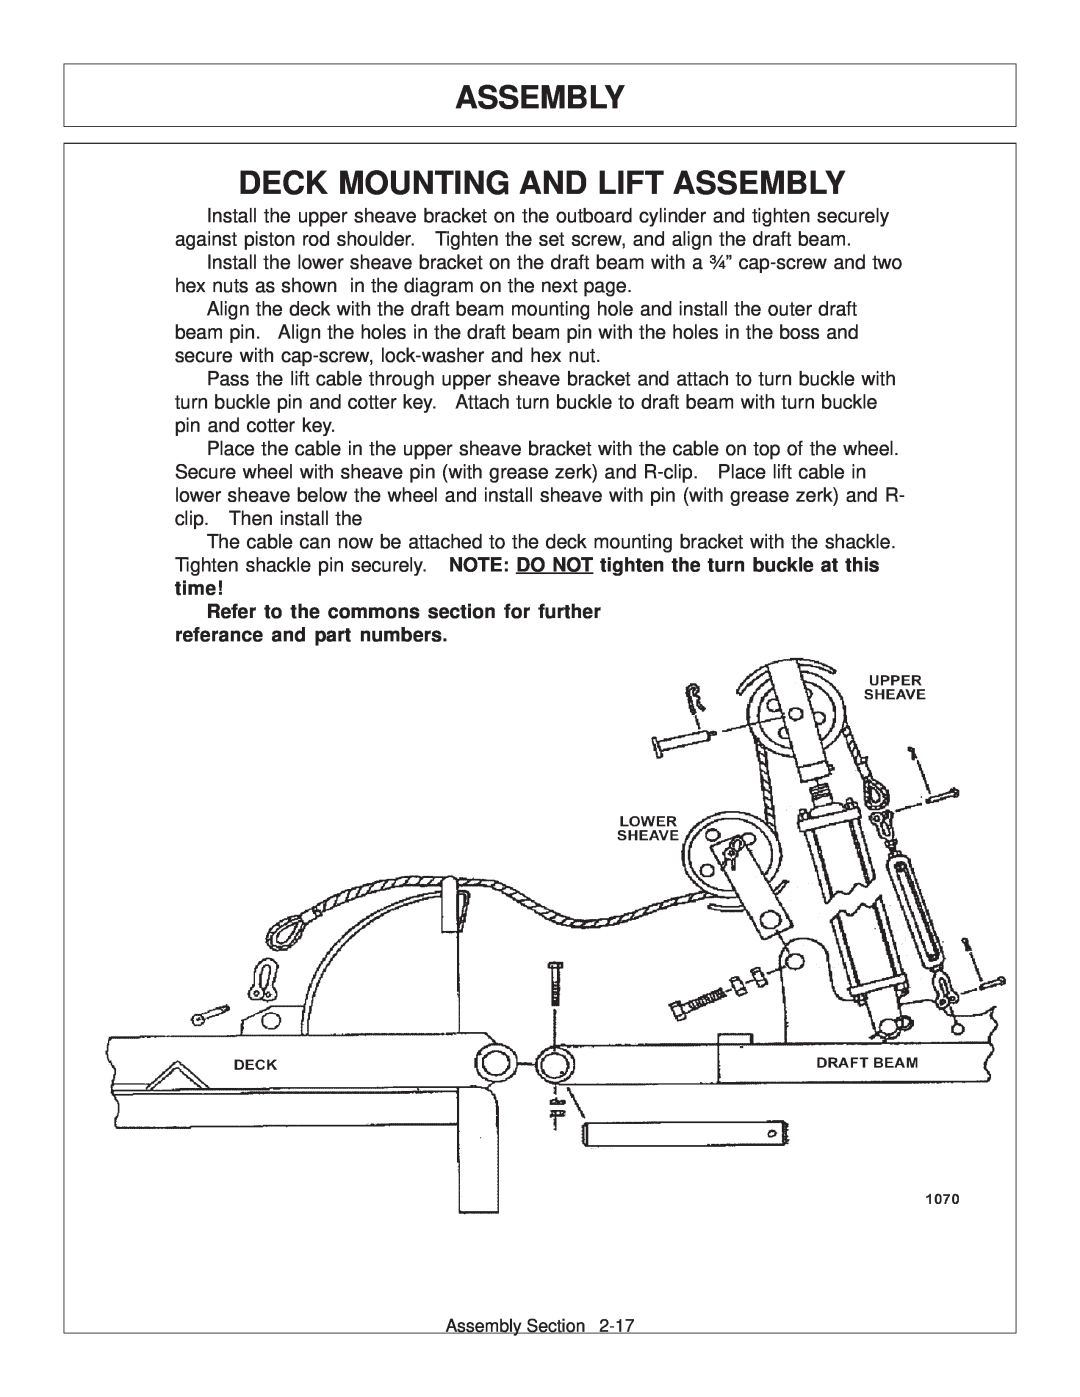 Tiger Products Co., Ltd JD 72-7520 manual Assembly Deck Mounting And Lift Assembly 